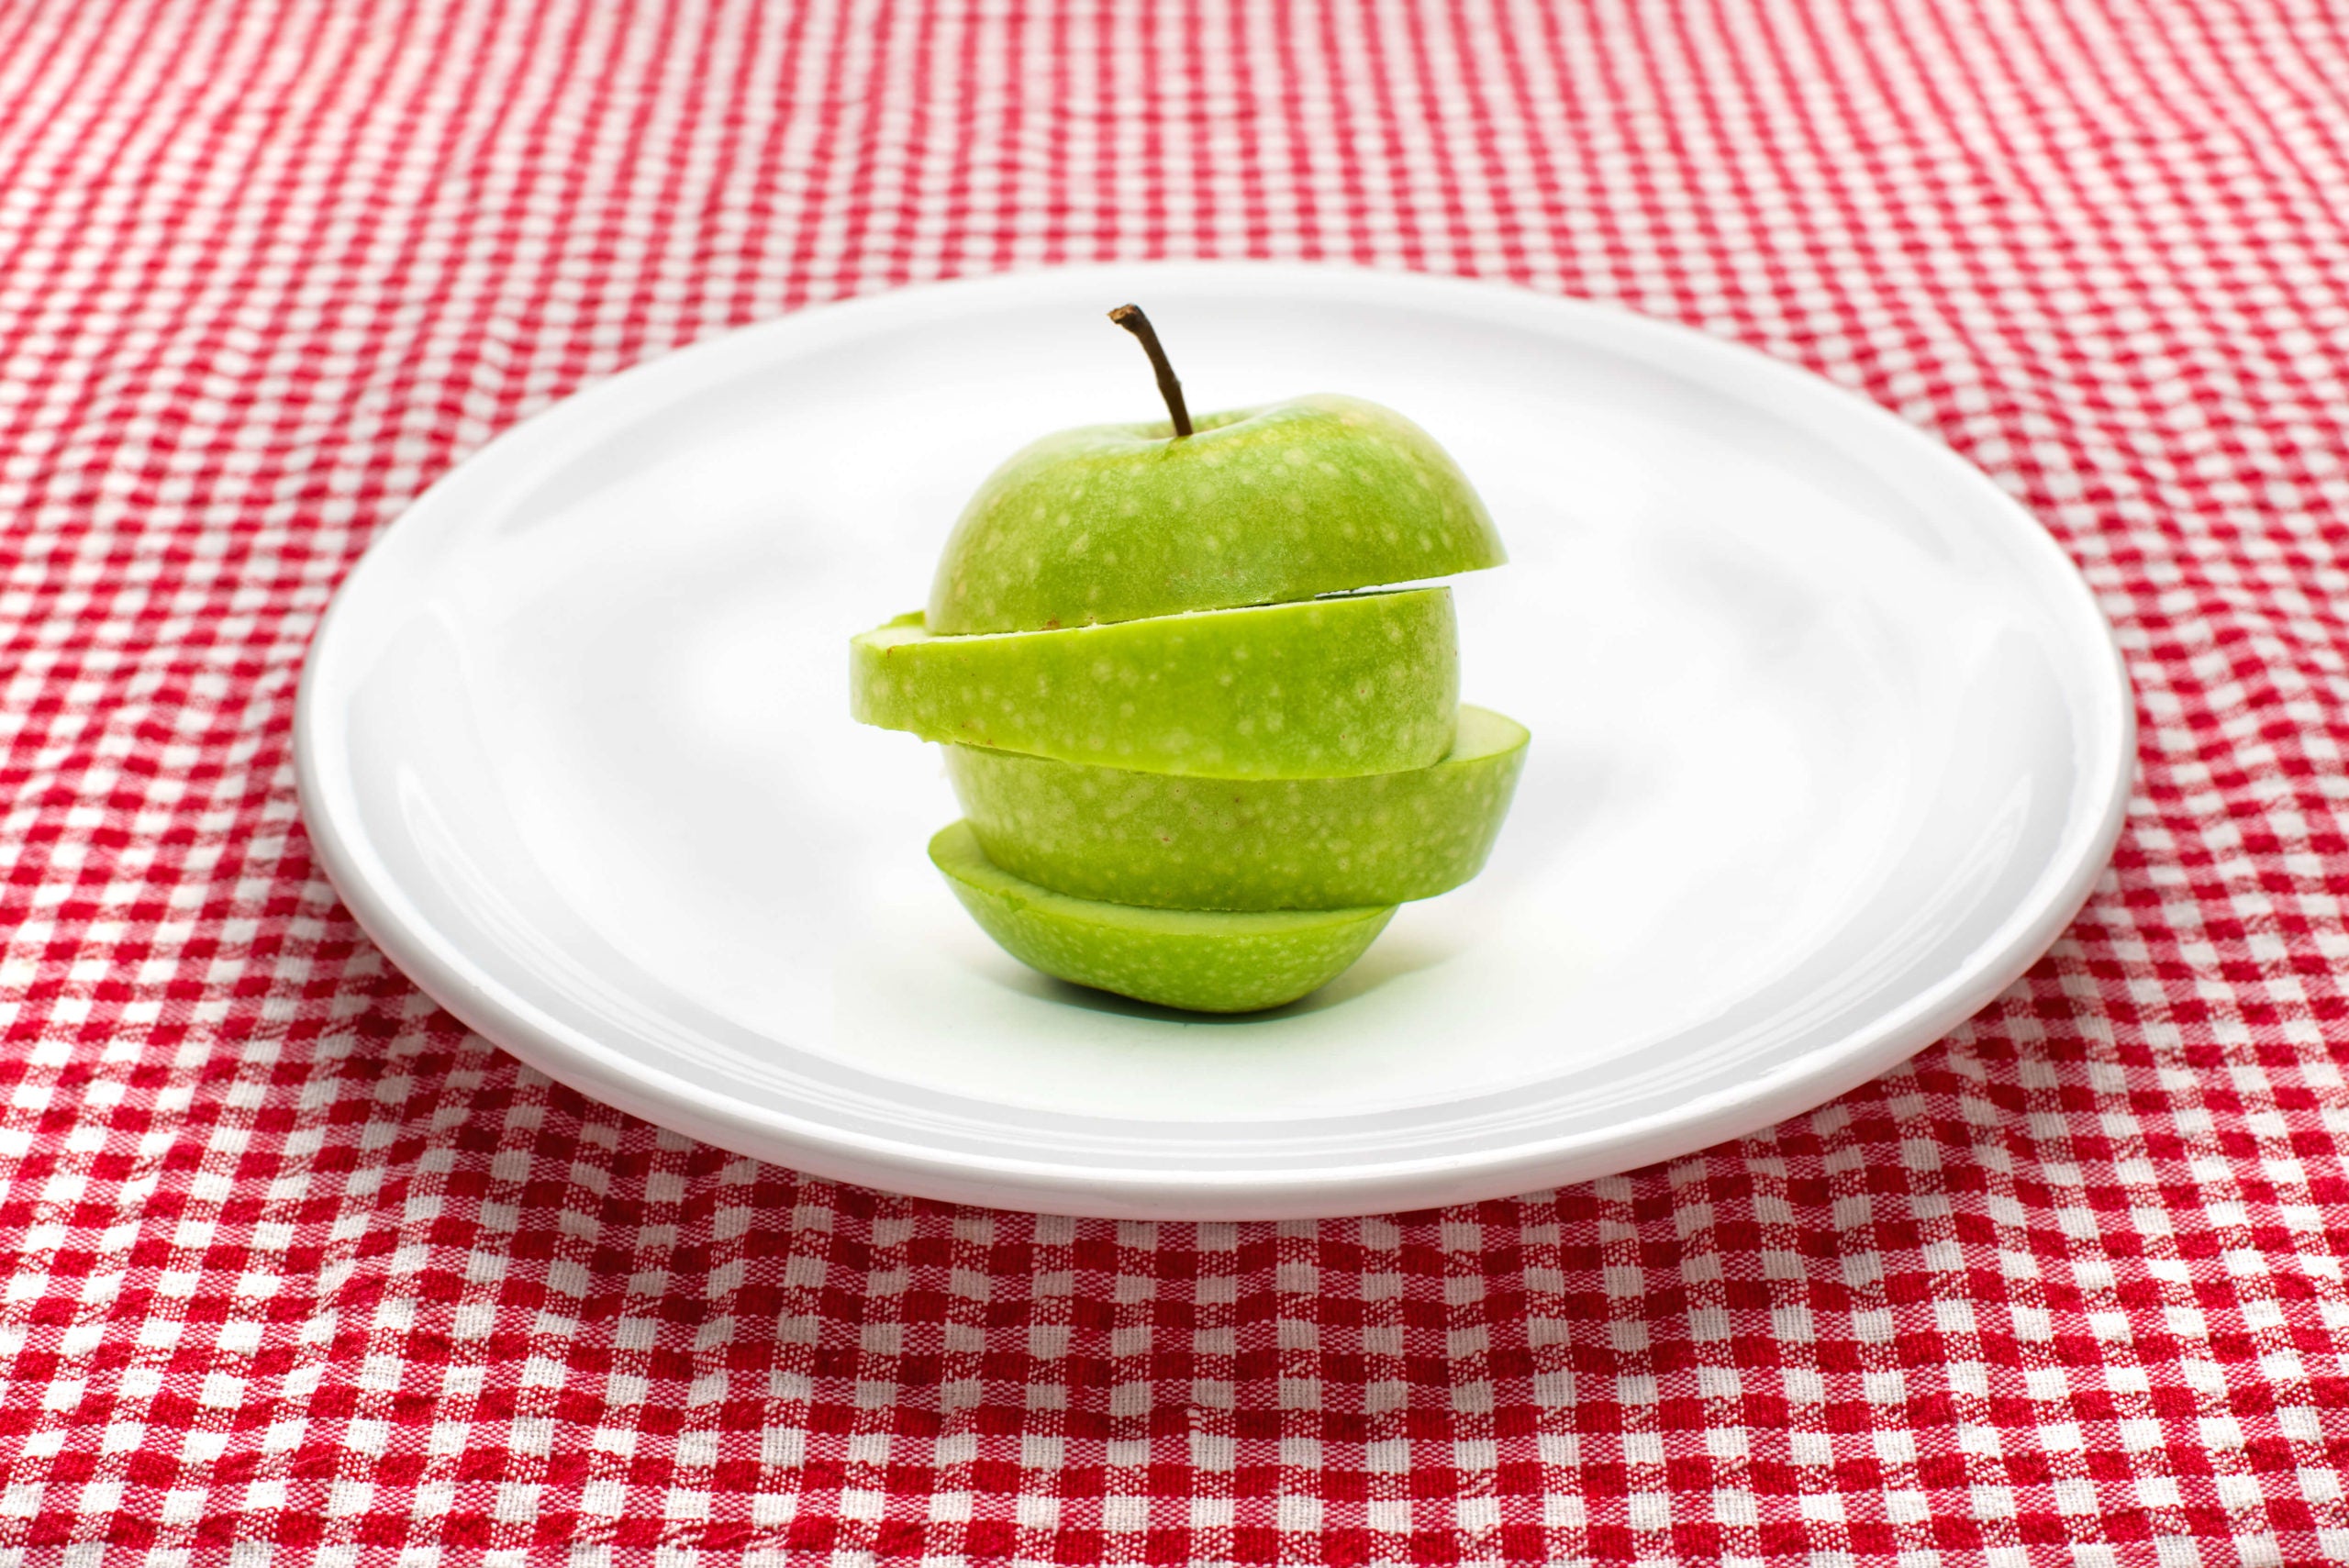 Restricted diet, an apple on a plate